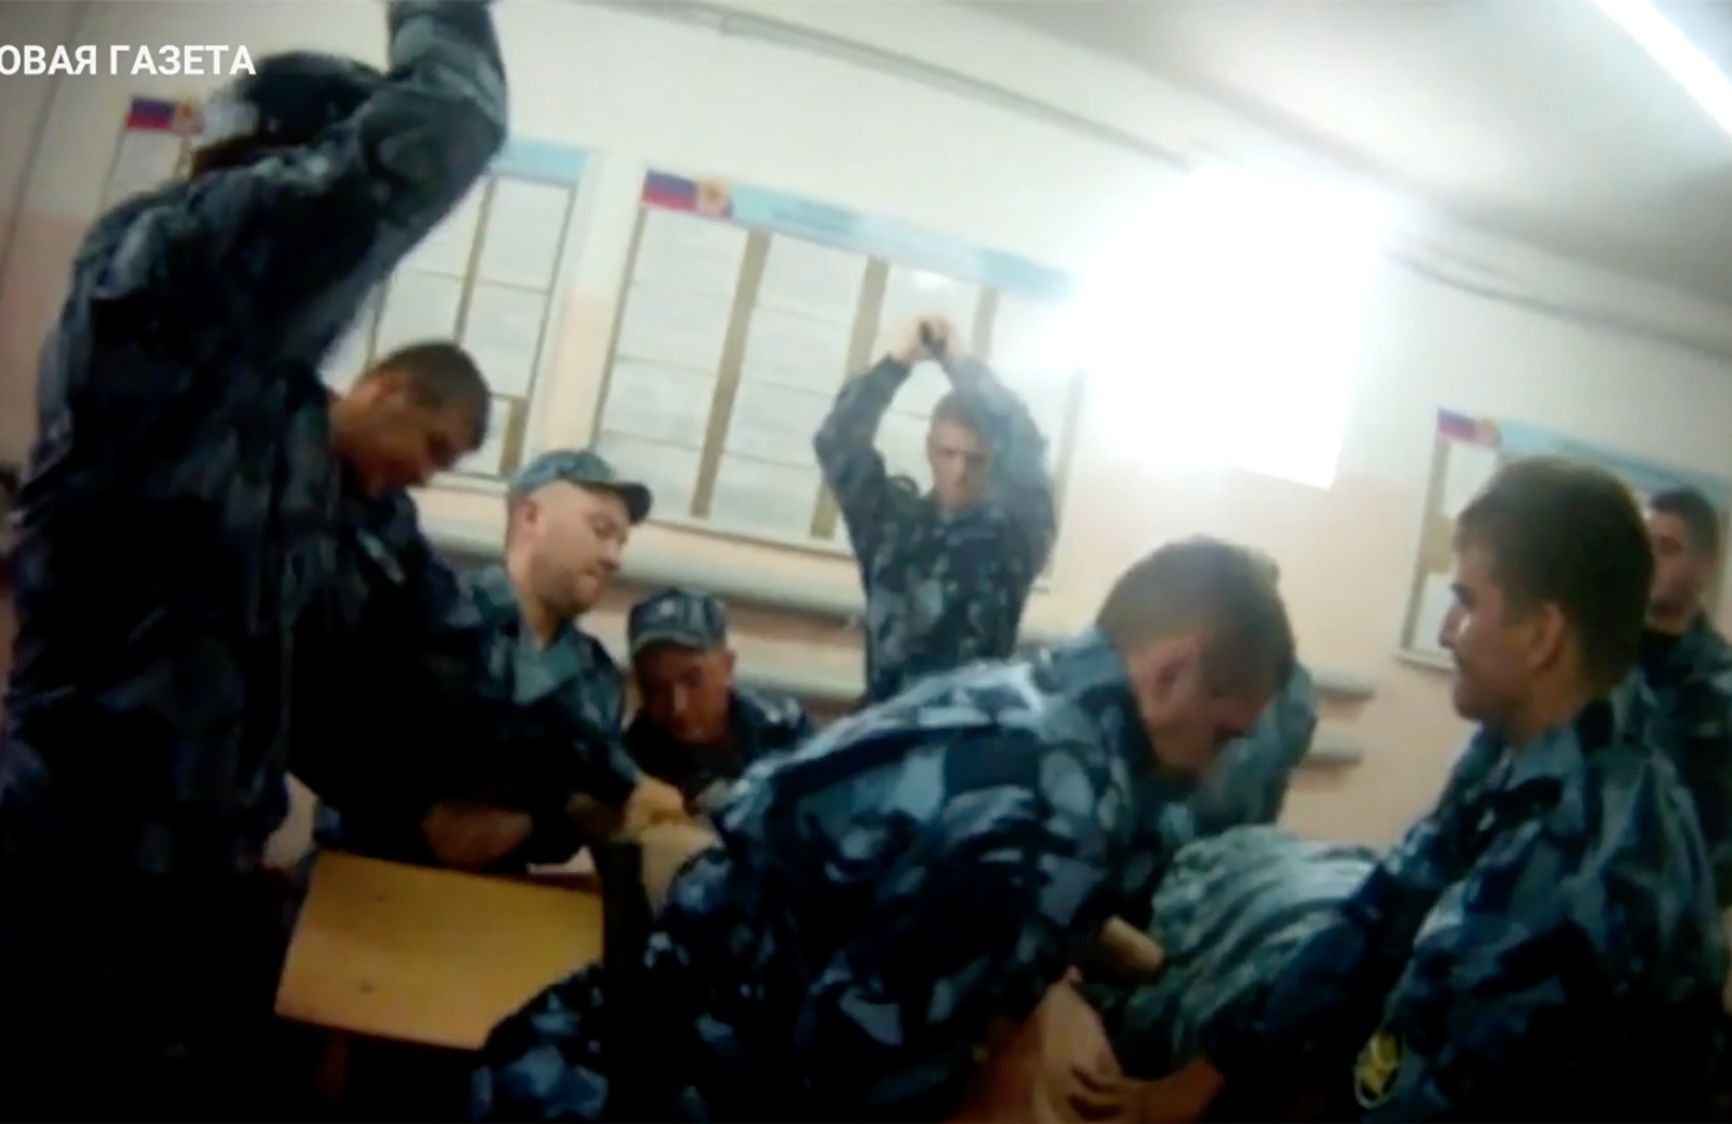 A still taken from one of a series of videos showing torture at the Saratov prison